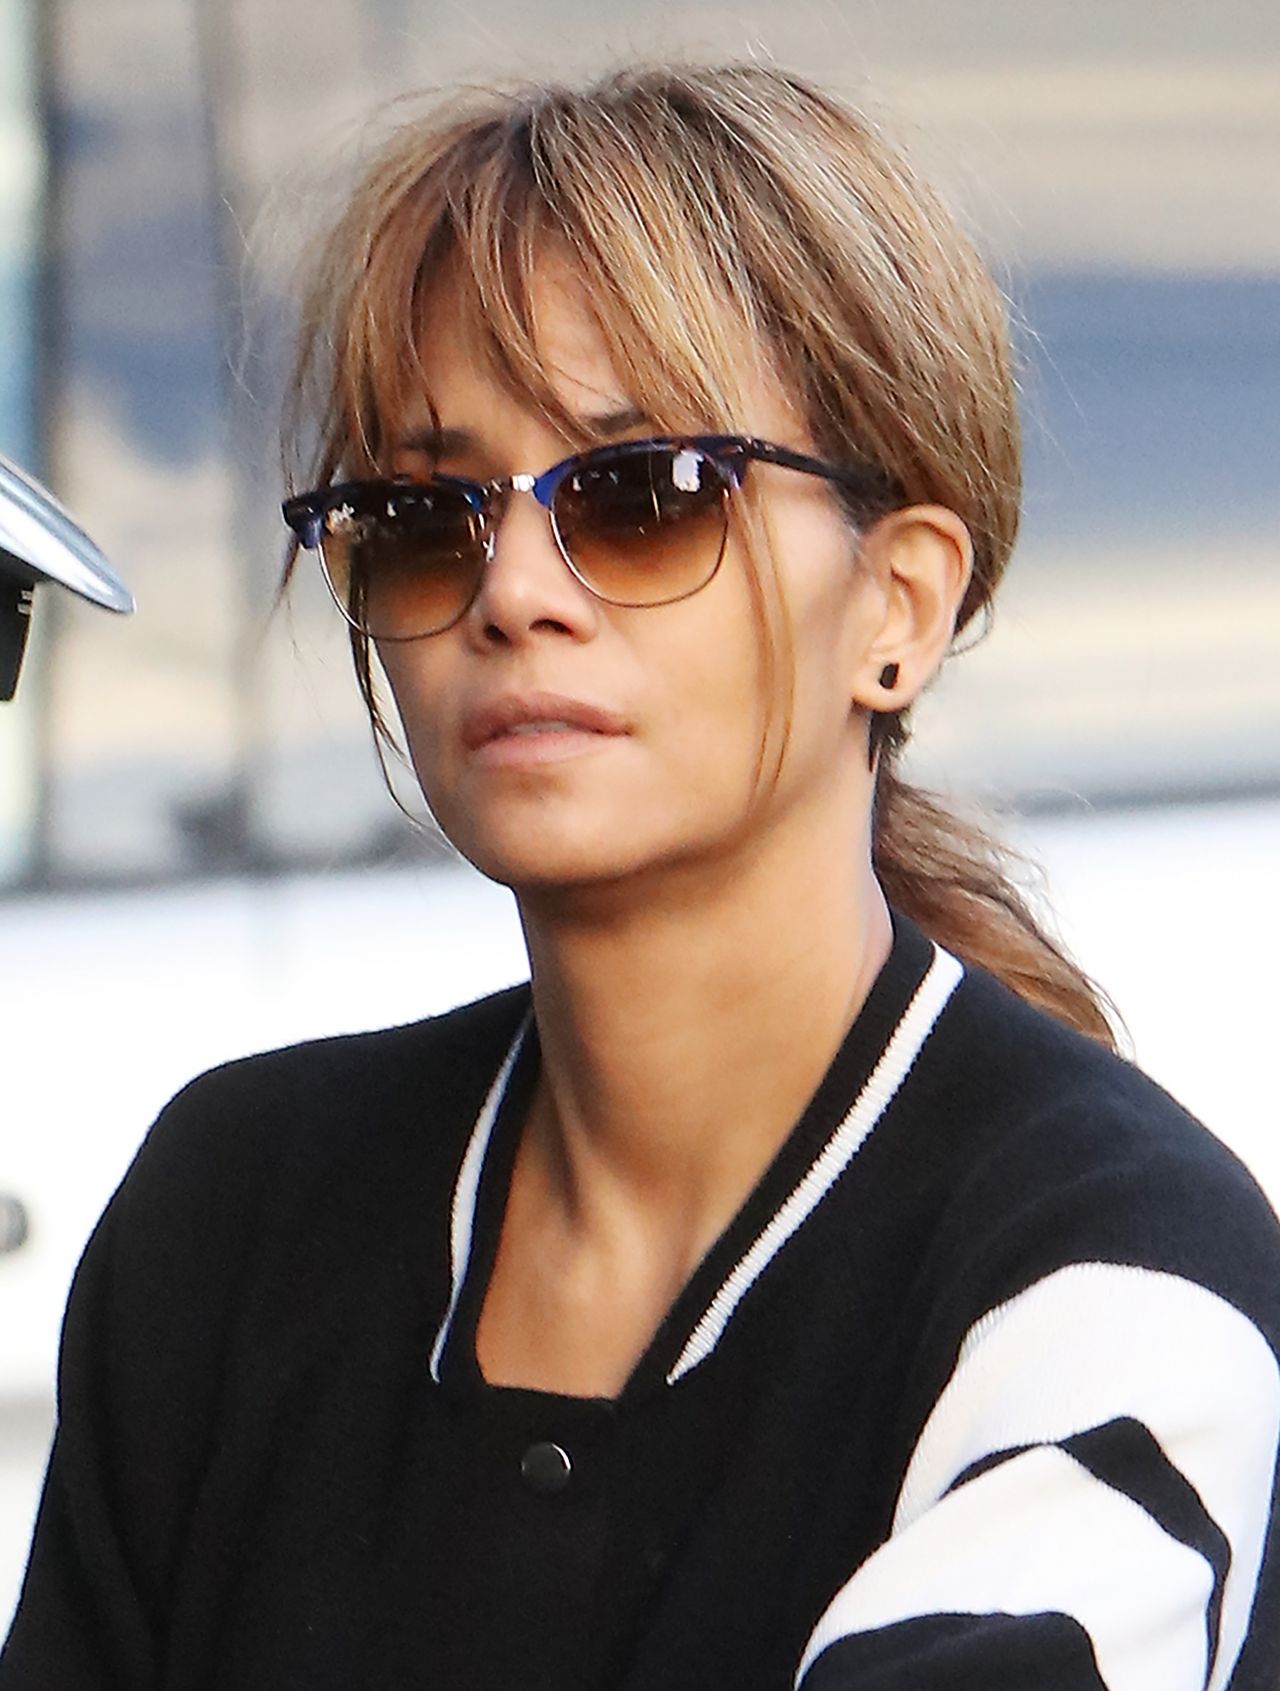 halle-berry-shopping-in-beverly-hills-01-03-2019-8.jpg